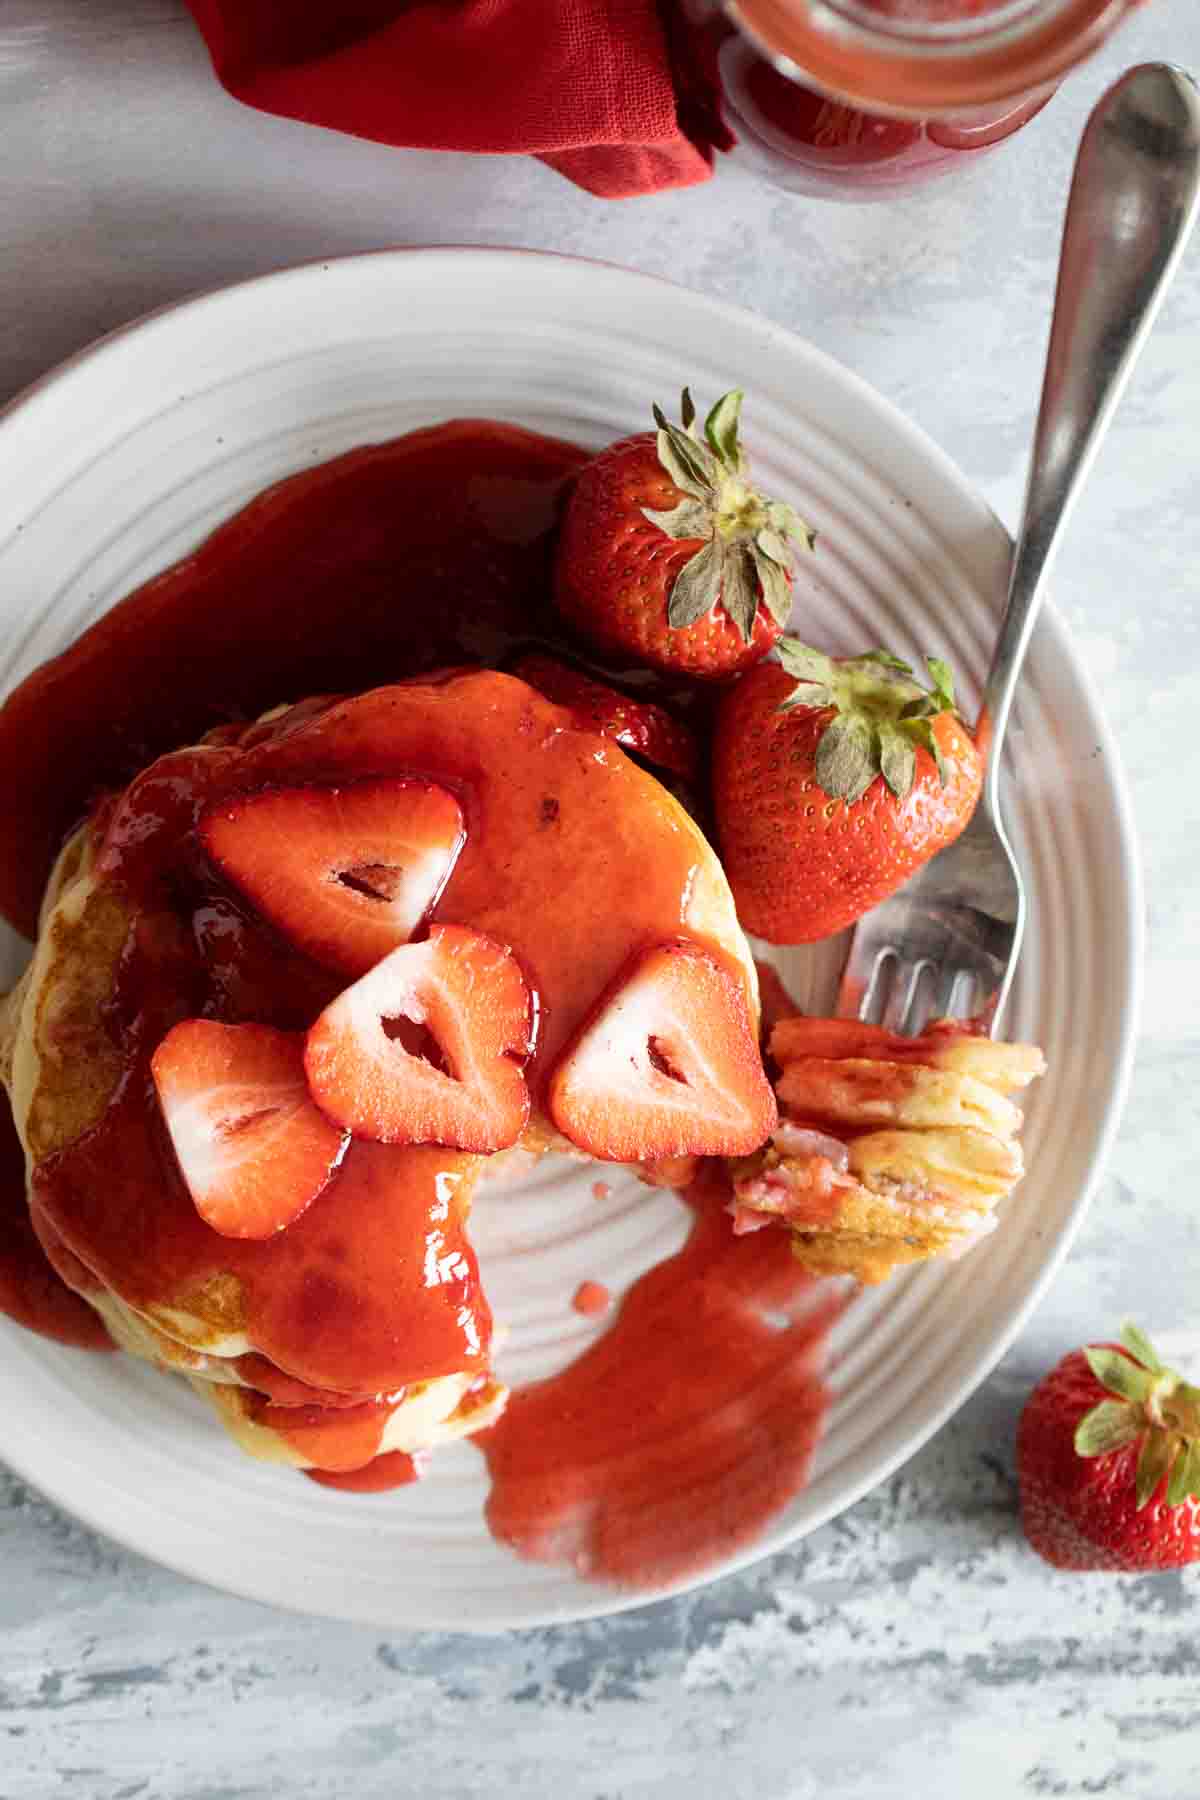 Strawberry Pancakes with a forkful taken from the stack